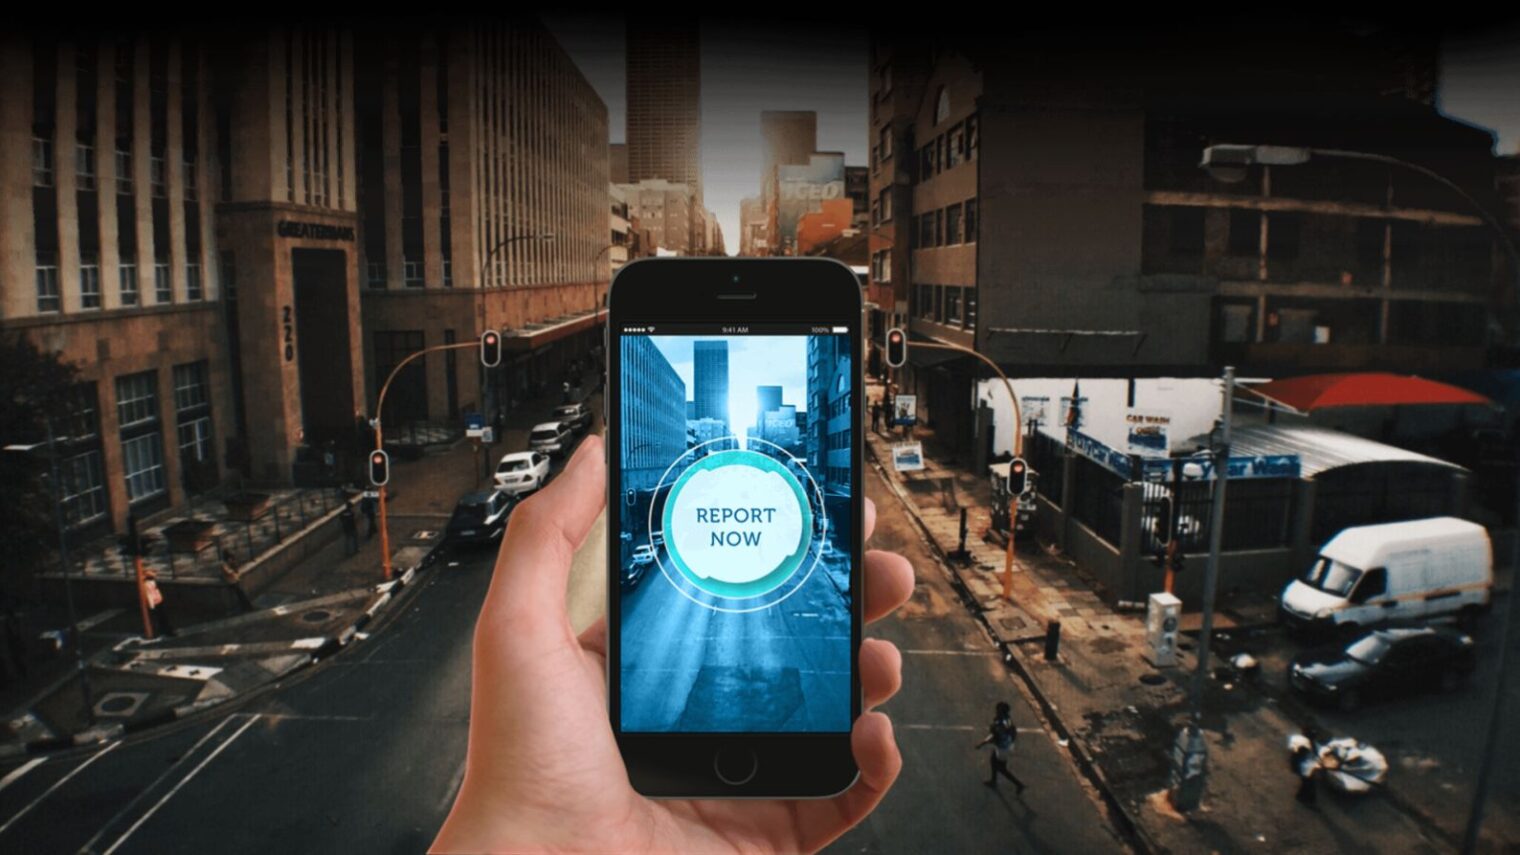 Reporty connects smartphone users instantly to emergency call centers and can give dispatchers vital audio and video information. Photo: courtesy